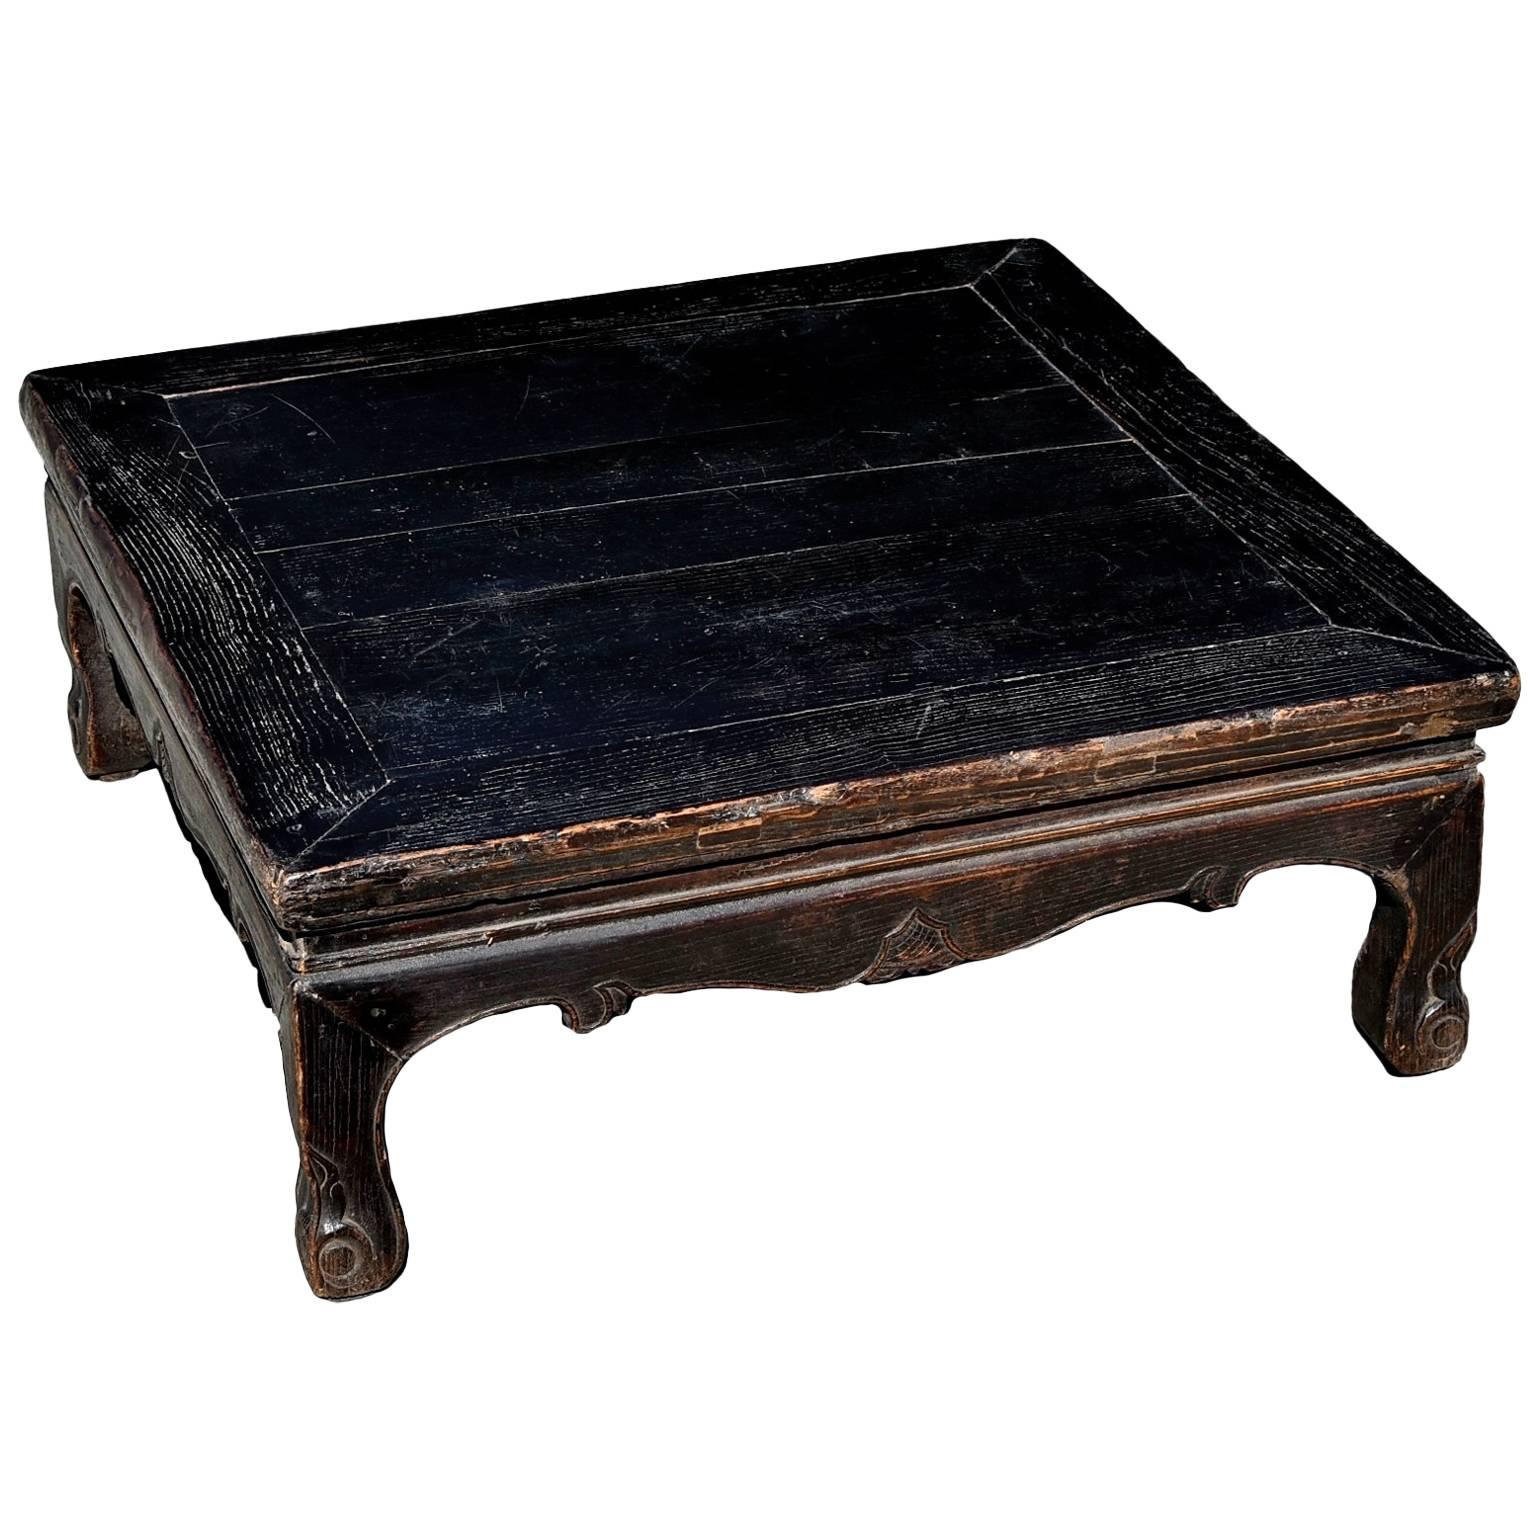 Antique Chinese Low Table, Black Kang Table